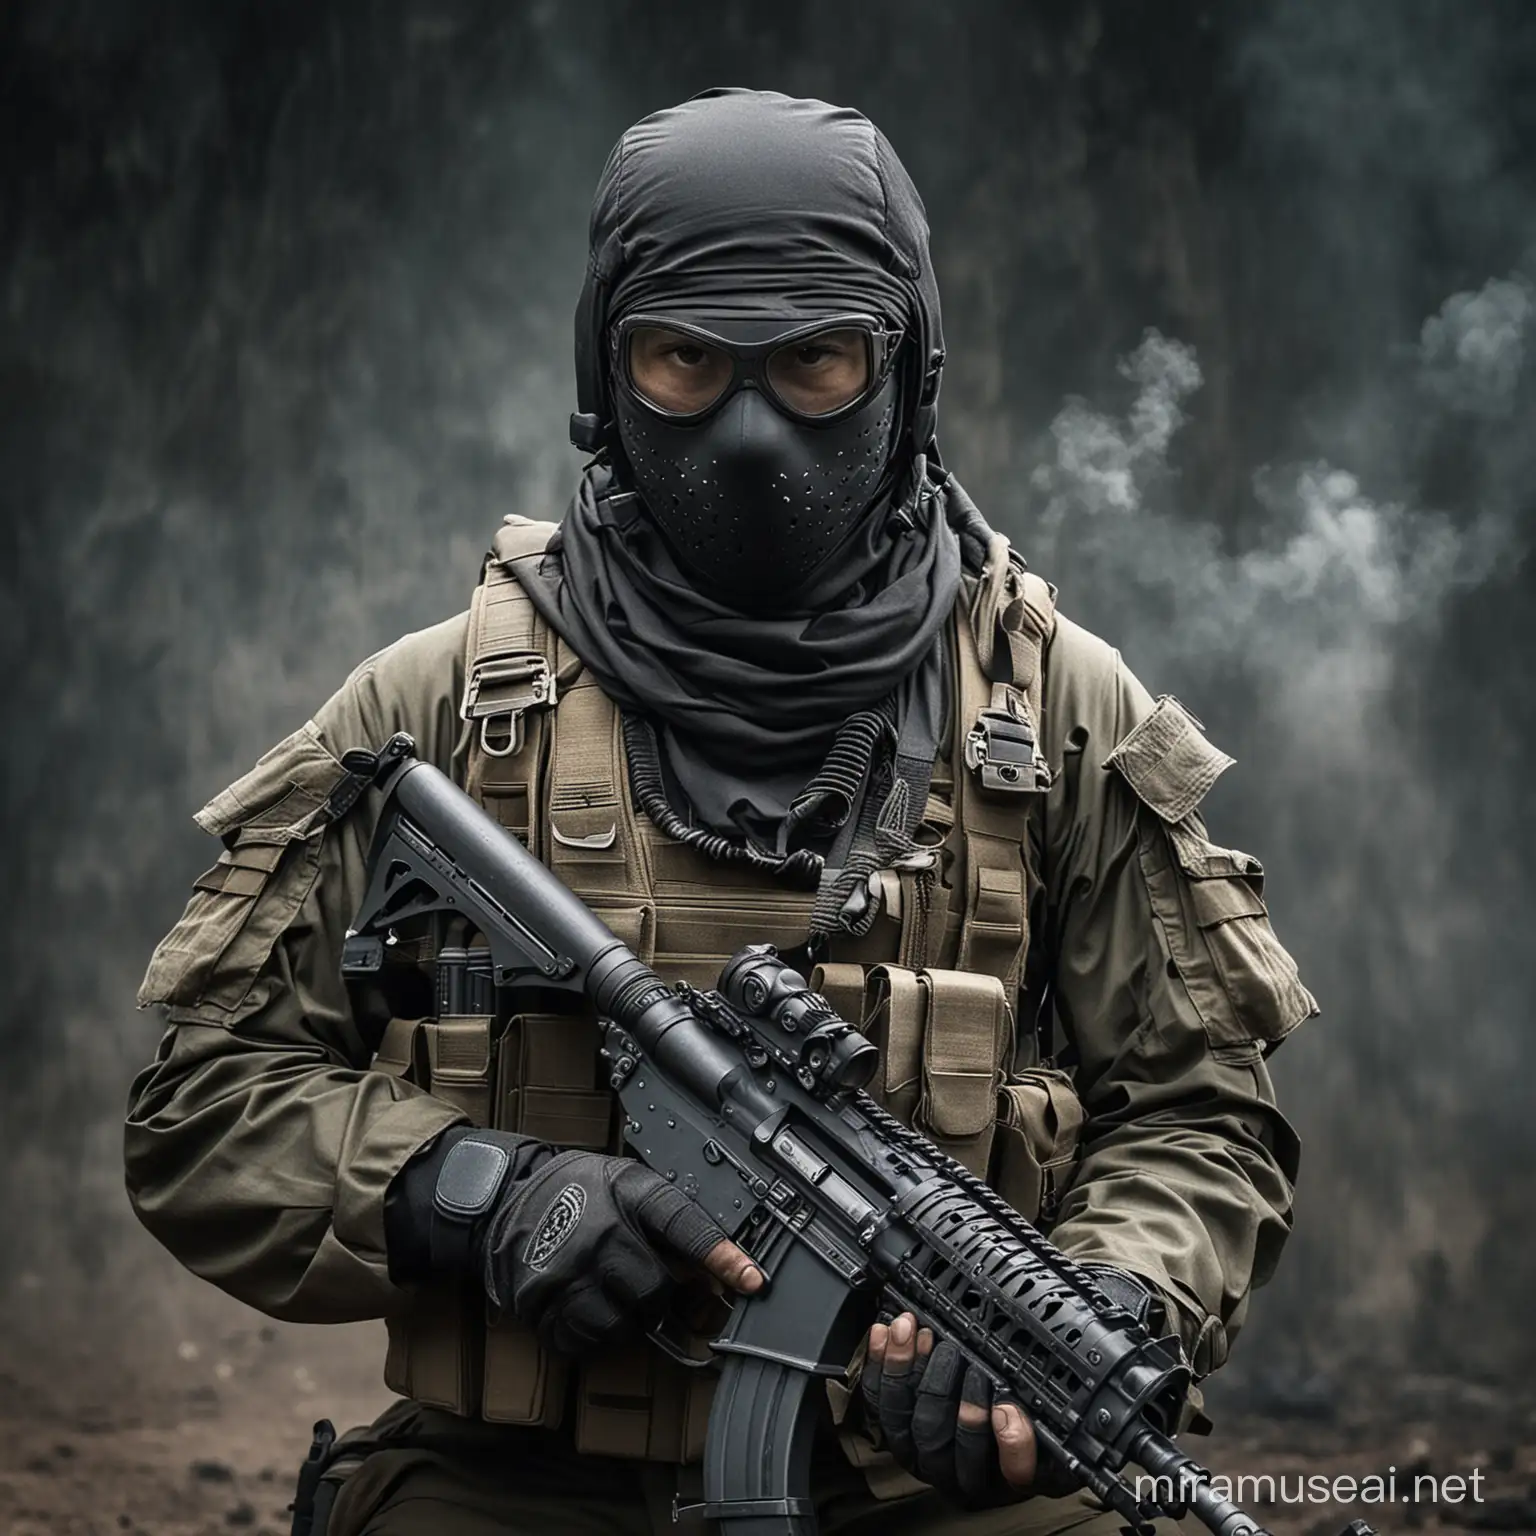 Malaysia Komando in Full Tactical Gear with Heavy Weapons